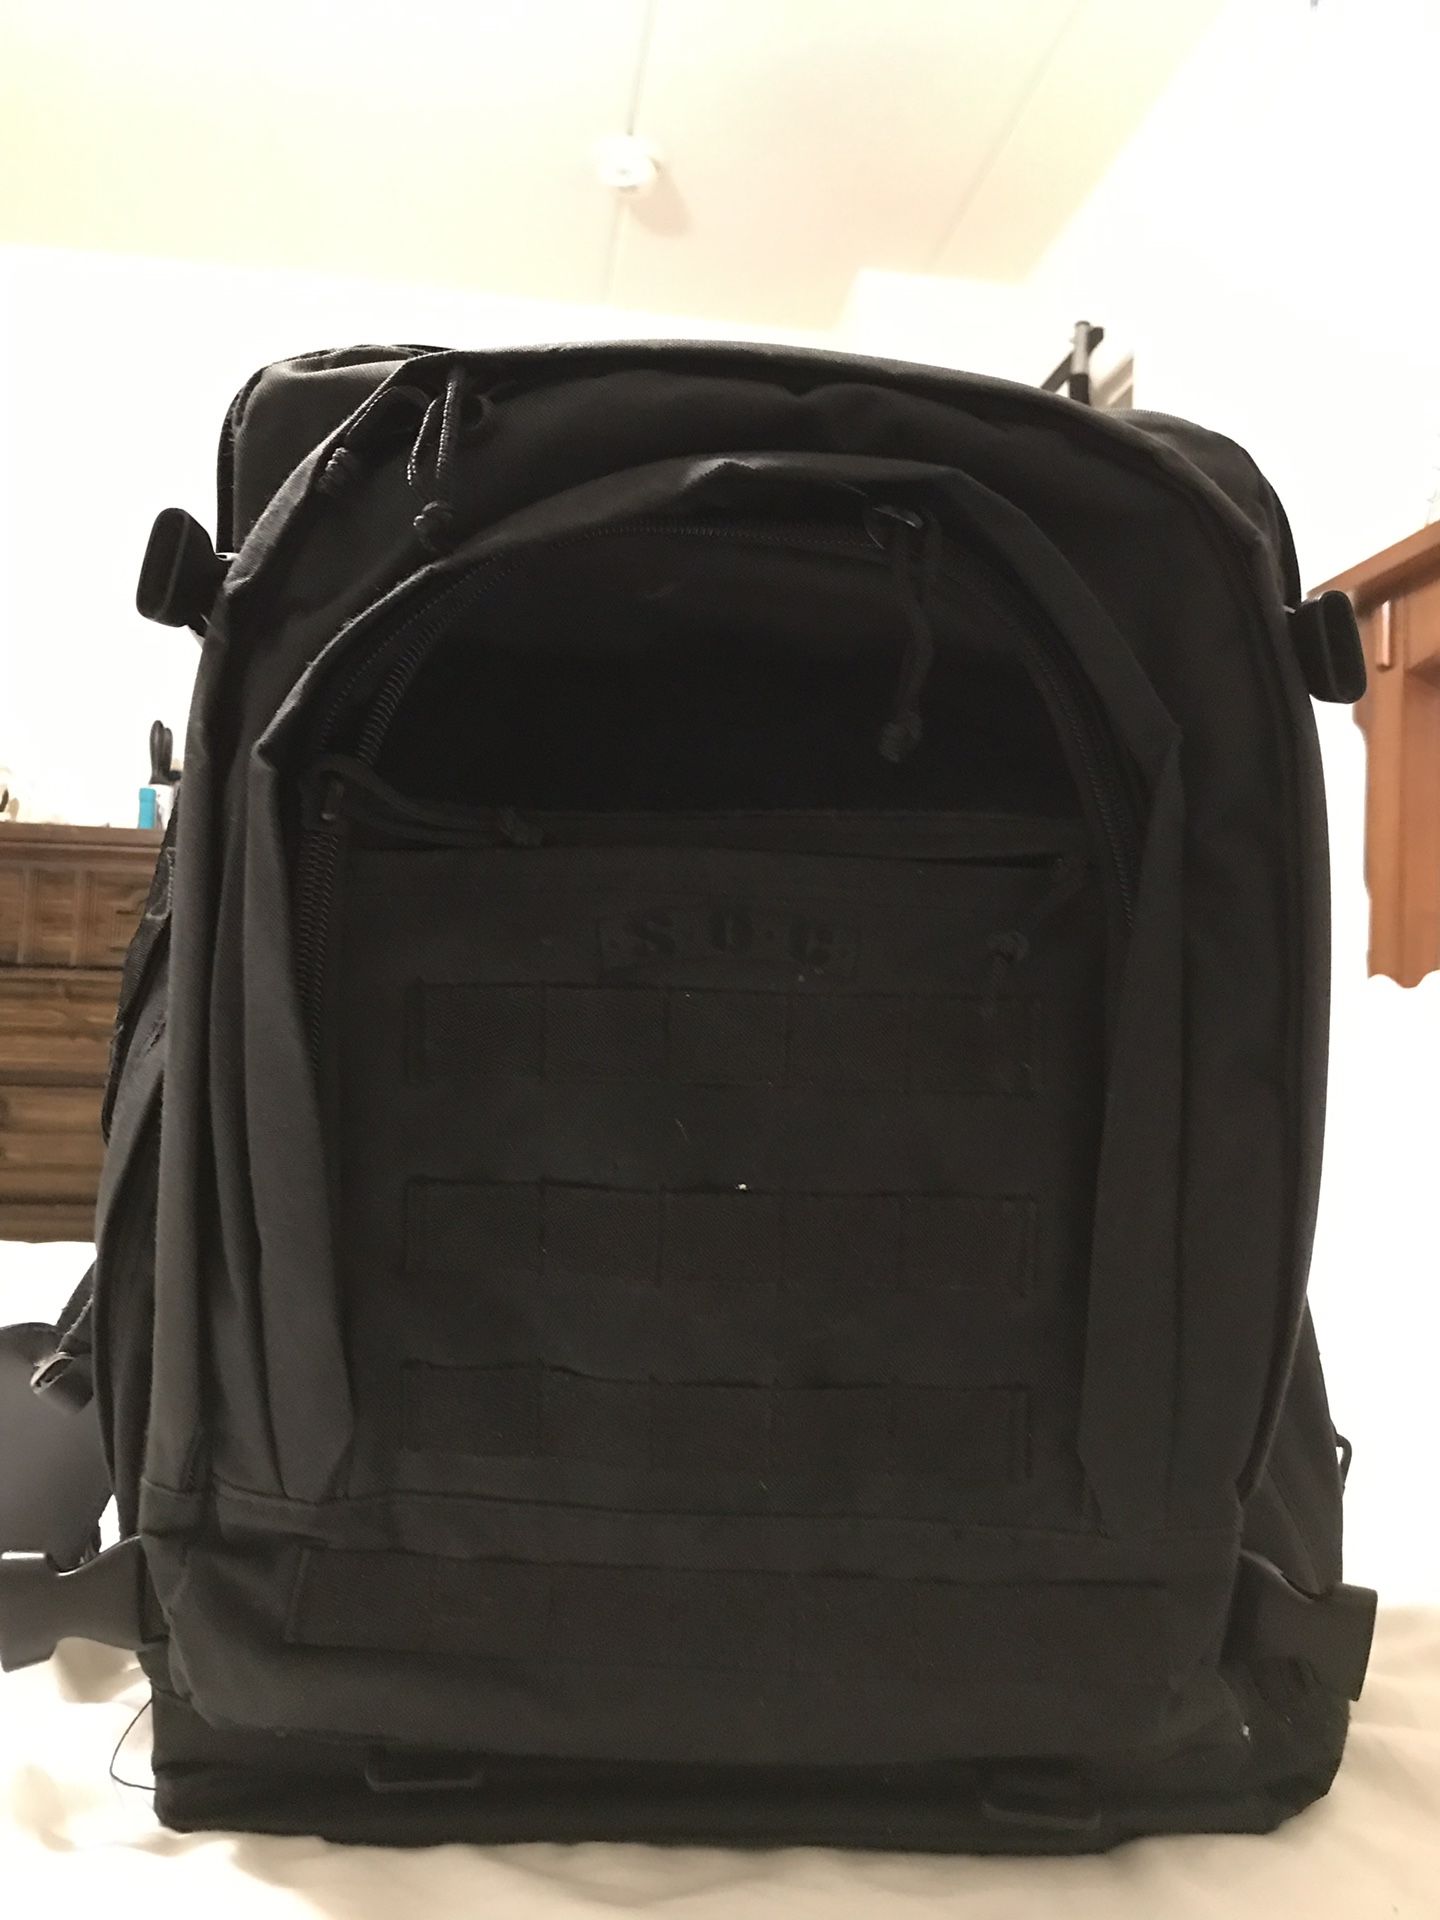 Sandpiper Bugout Gear Backpack